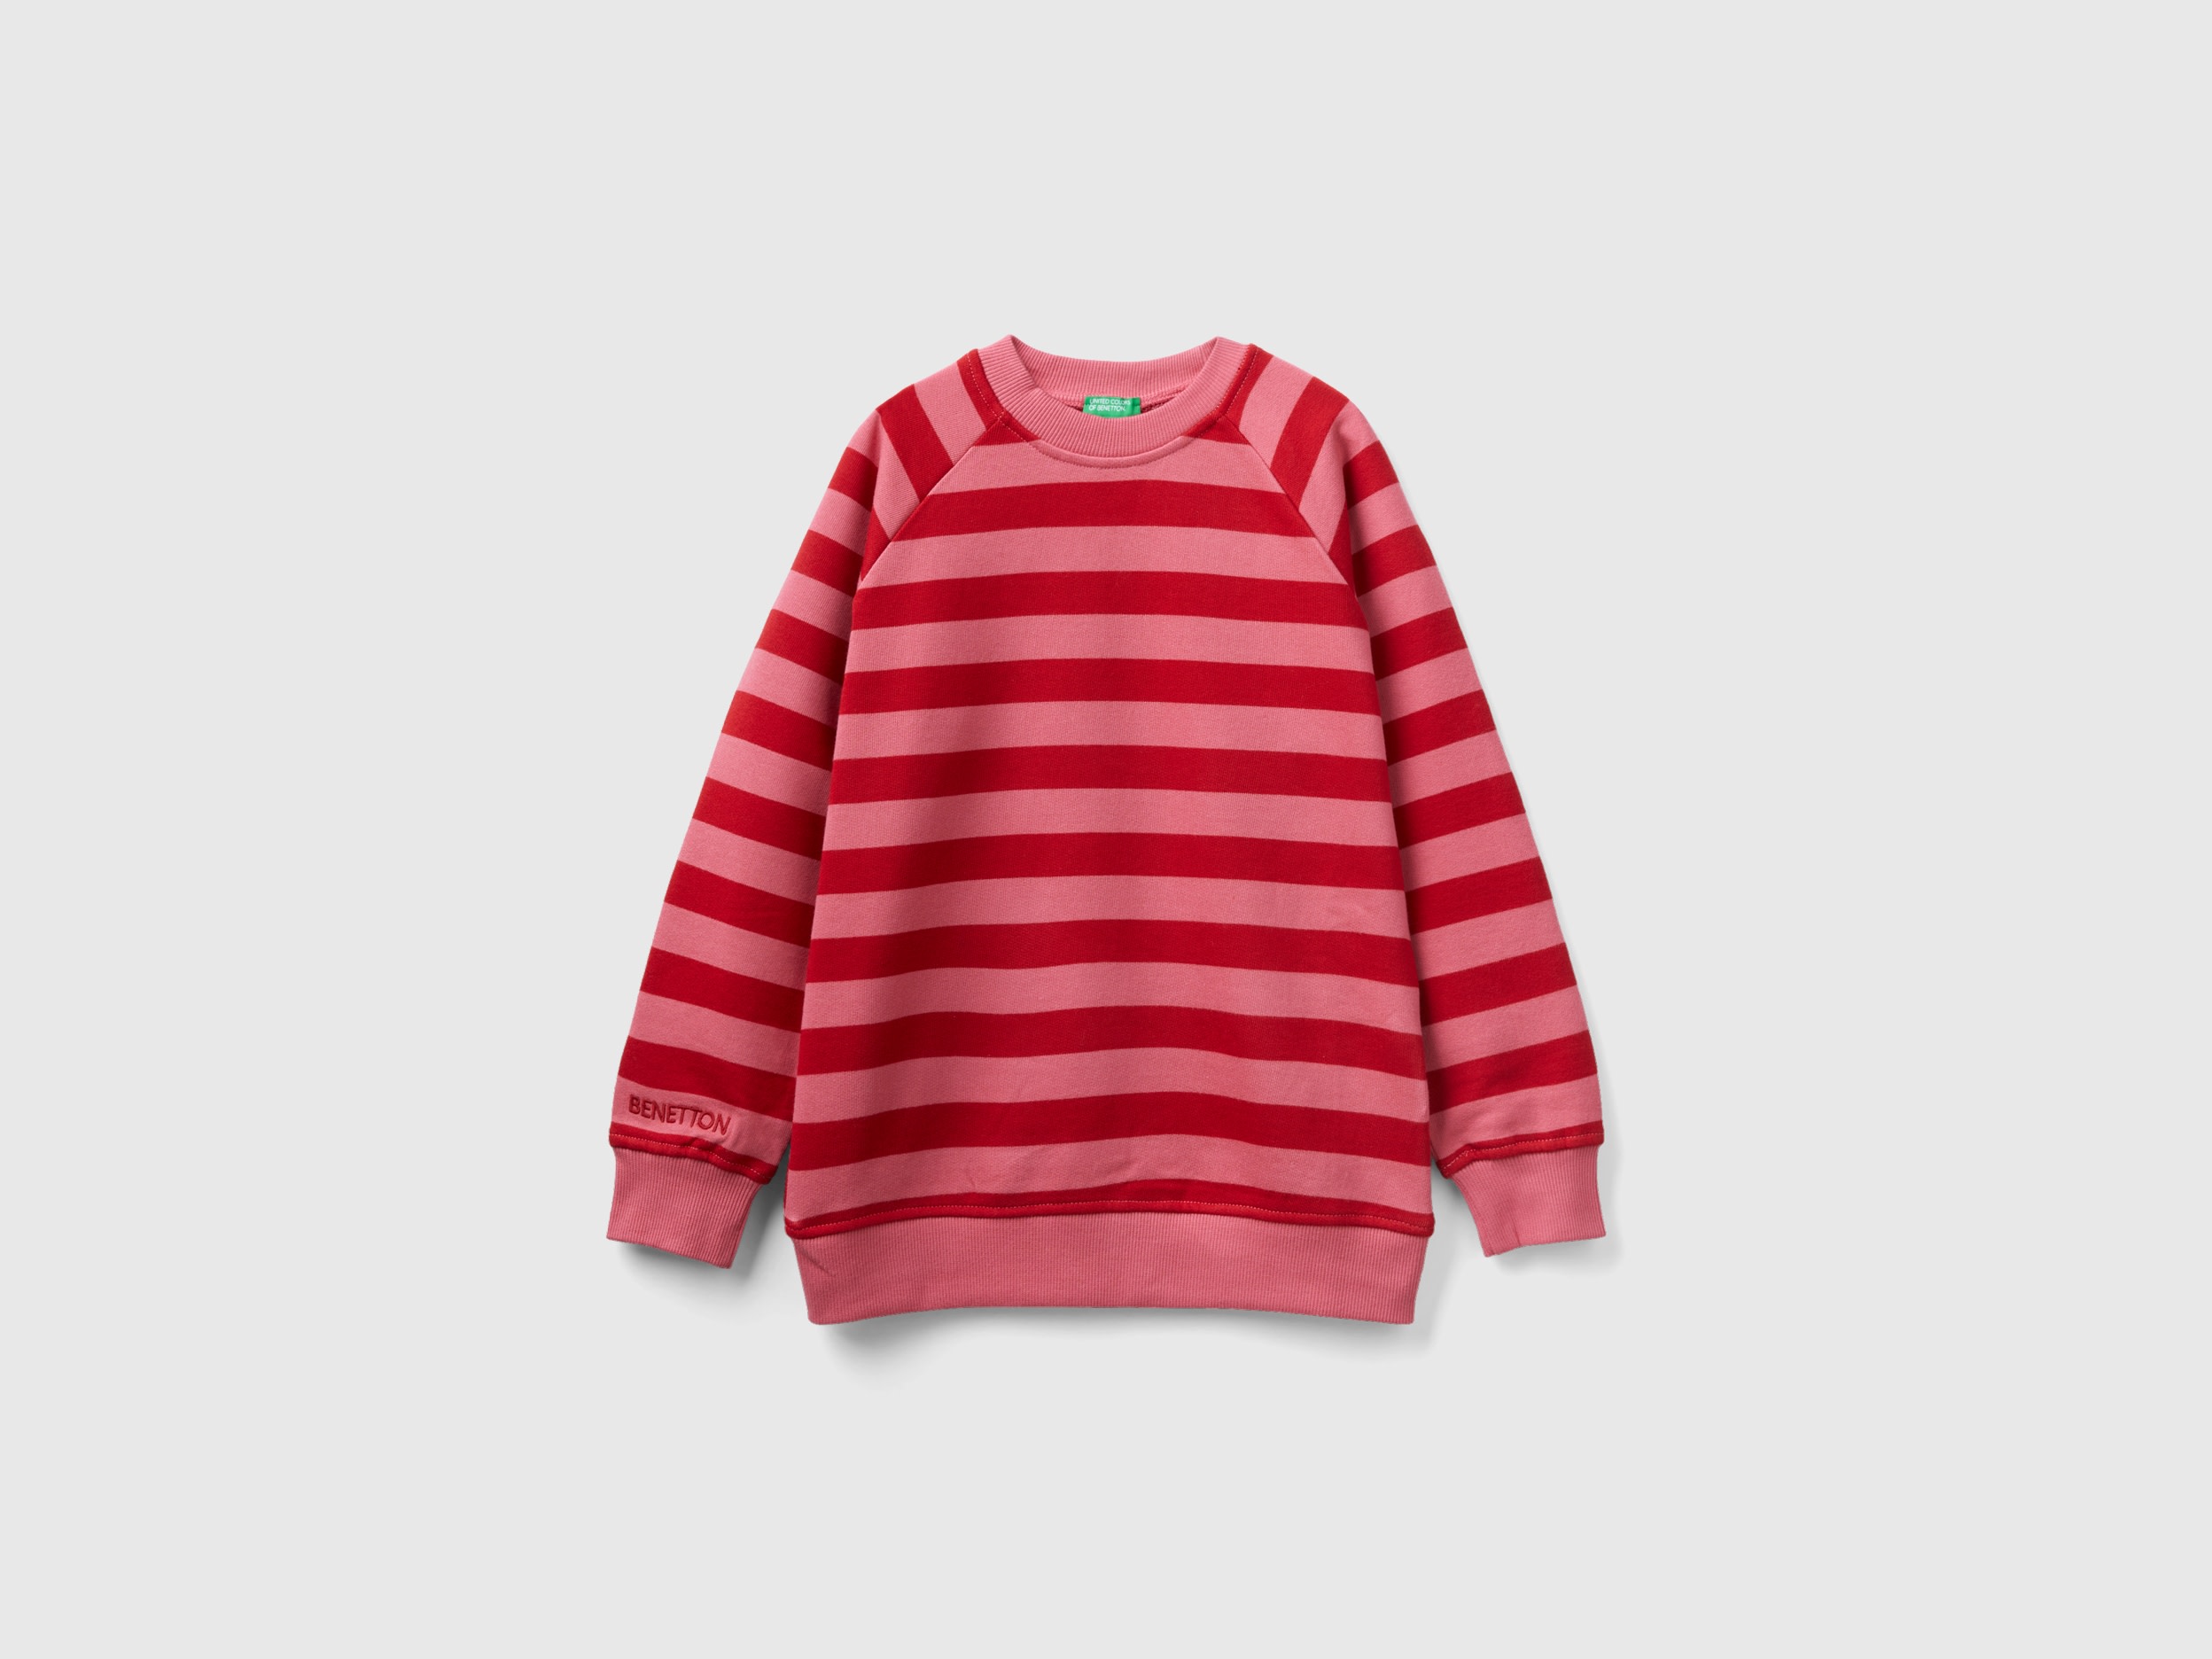 Benetton, Pink And Red Striped Sweatshirt, size L, Multi-color, Kids